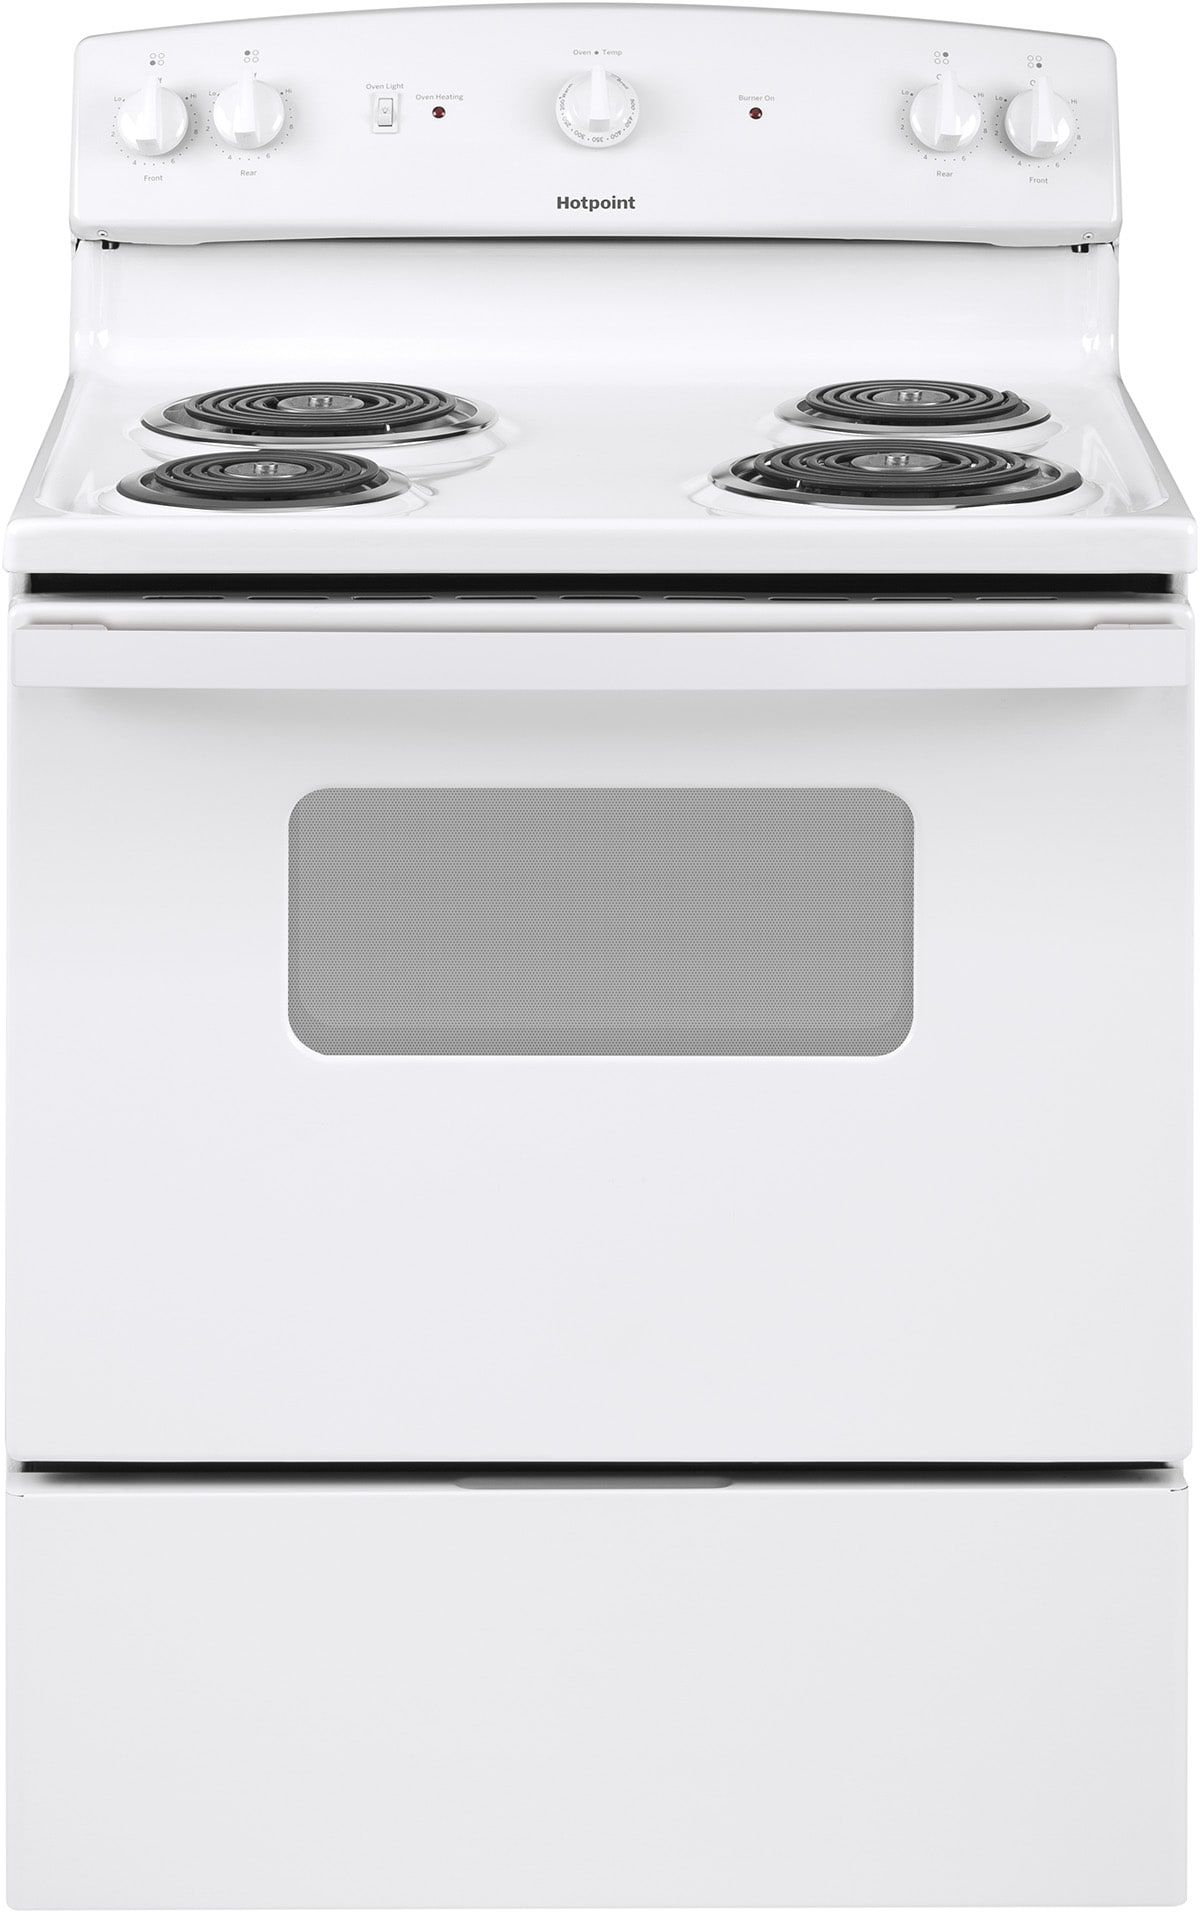 Hot Selling Kitchen Appliance Free Standing Oven with Electric